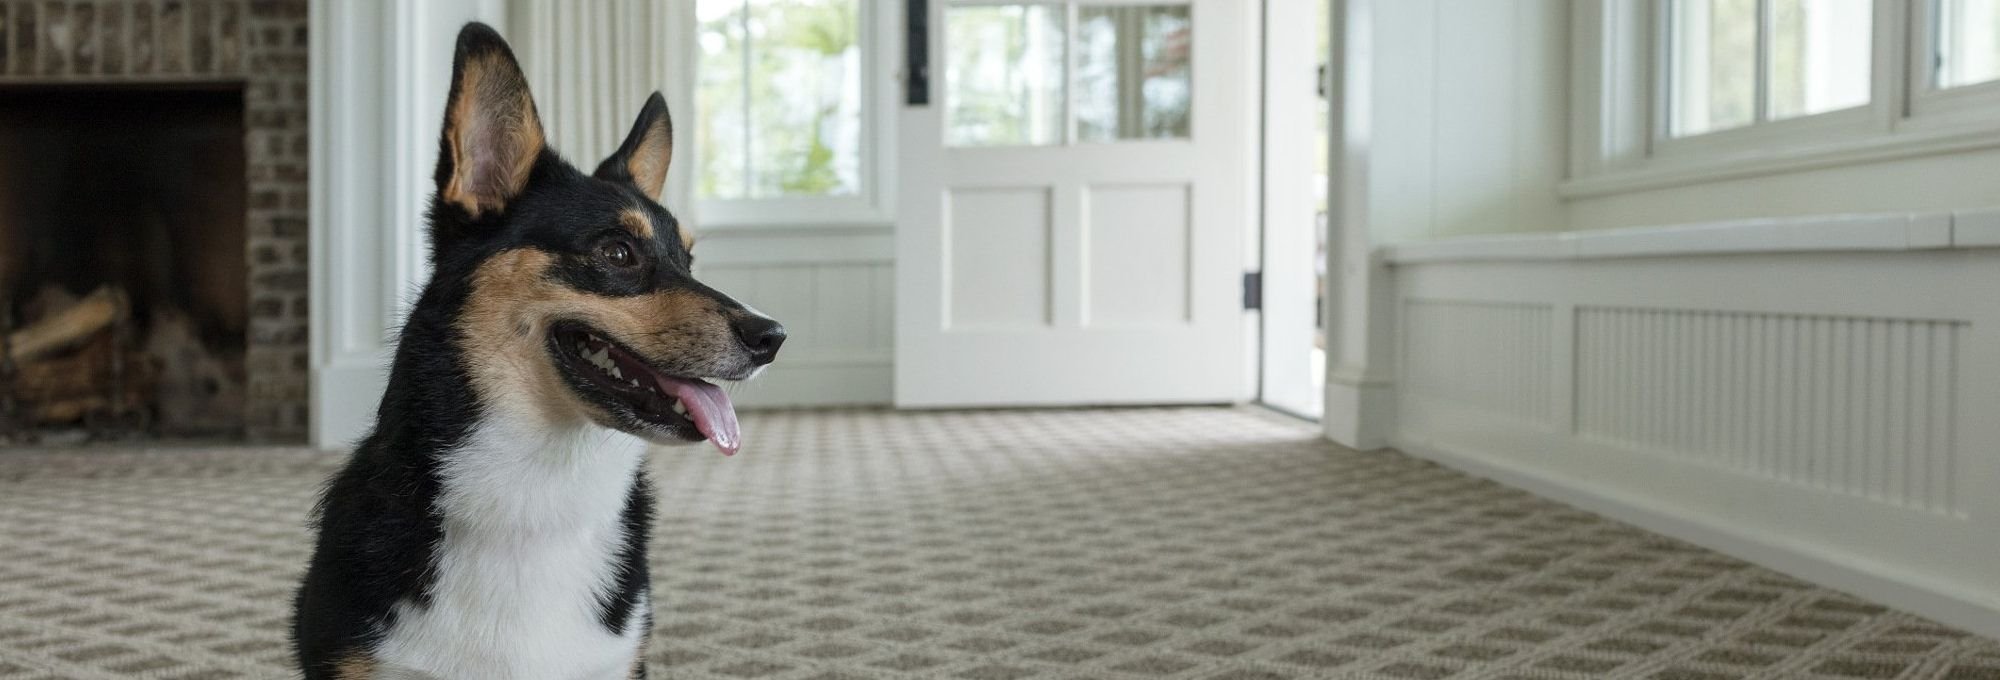 Happy dog in a living room with patterned carpet from Korfhage Floor Covering in the Louisville, KY area